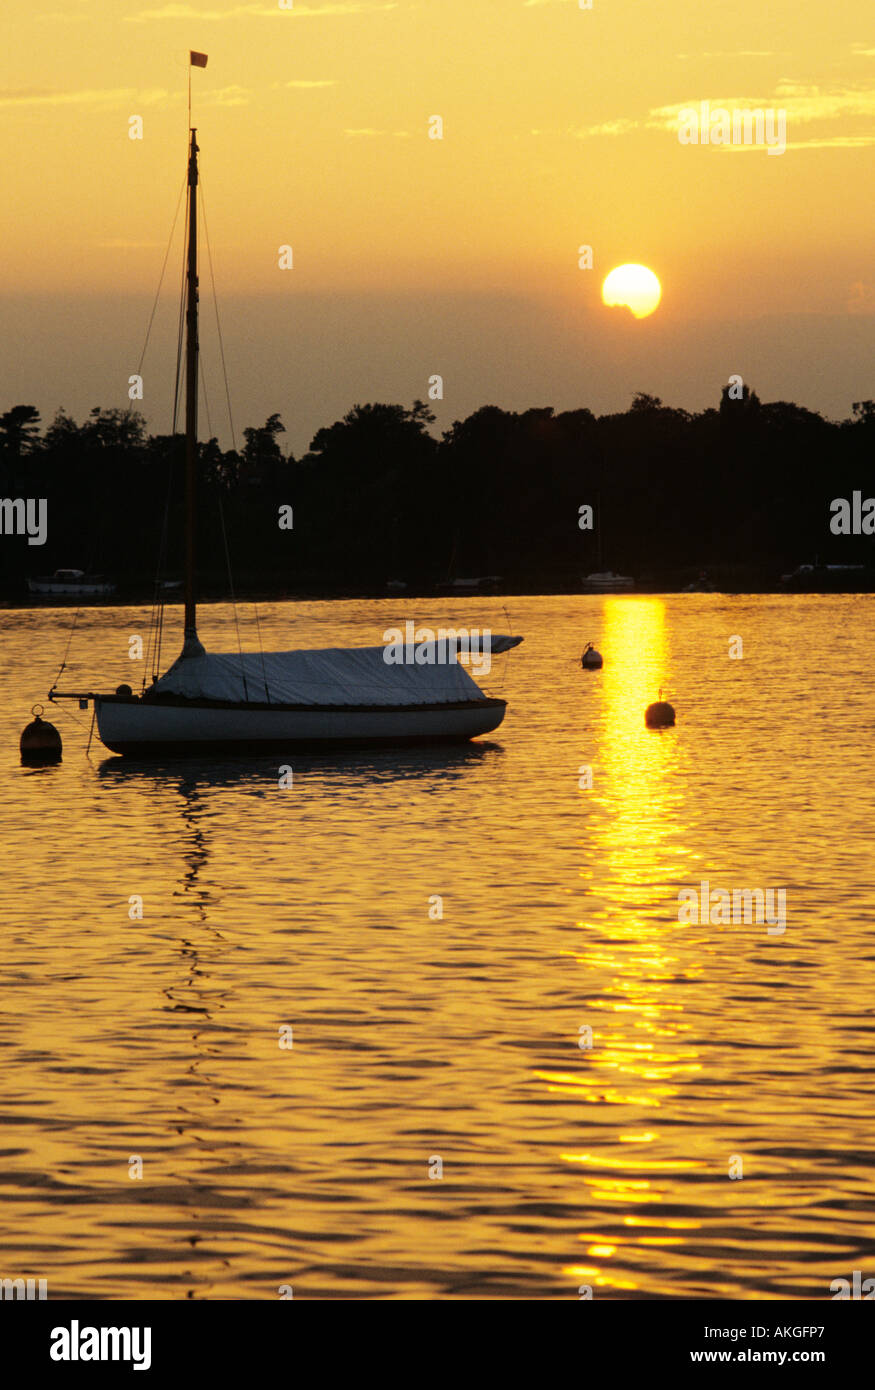 Sunset over water with moored and covered sailing yacht in foreground. Oulton Broad, Suffolk, England Stock Photo